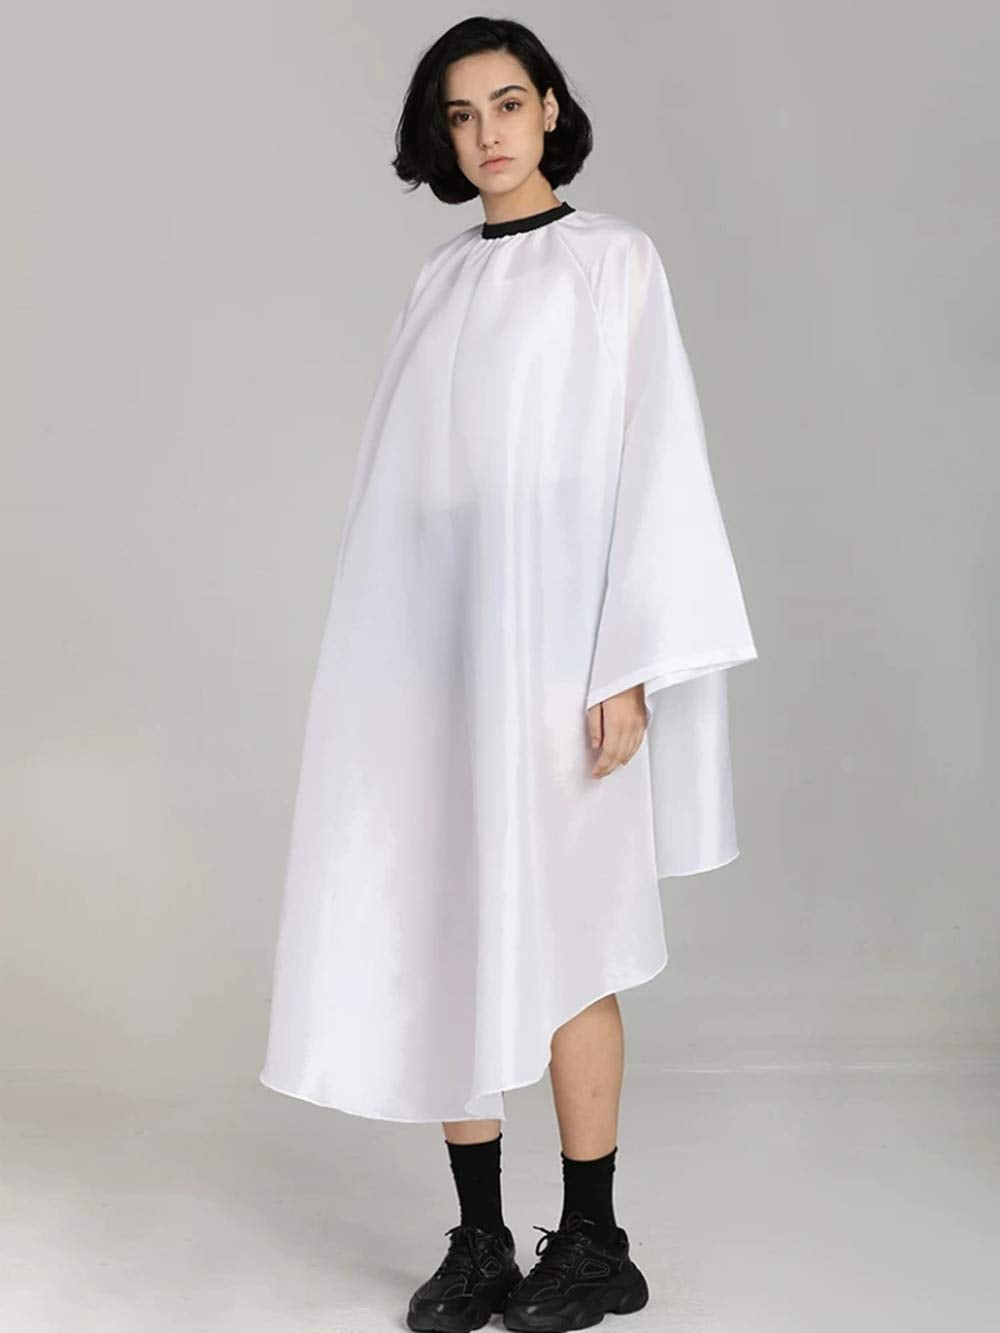 White Hairdressing Cape High Quality - Theresia Cosmetics - barber tools - Theresia Cosmetics